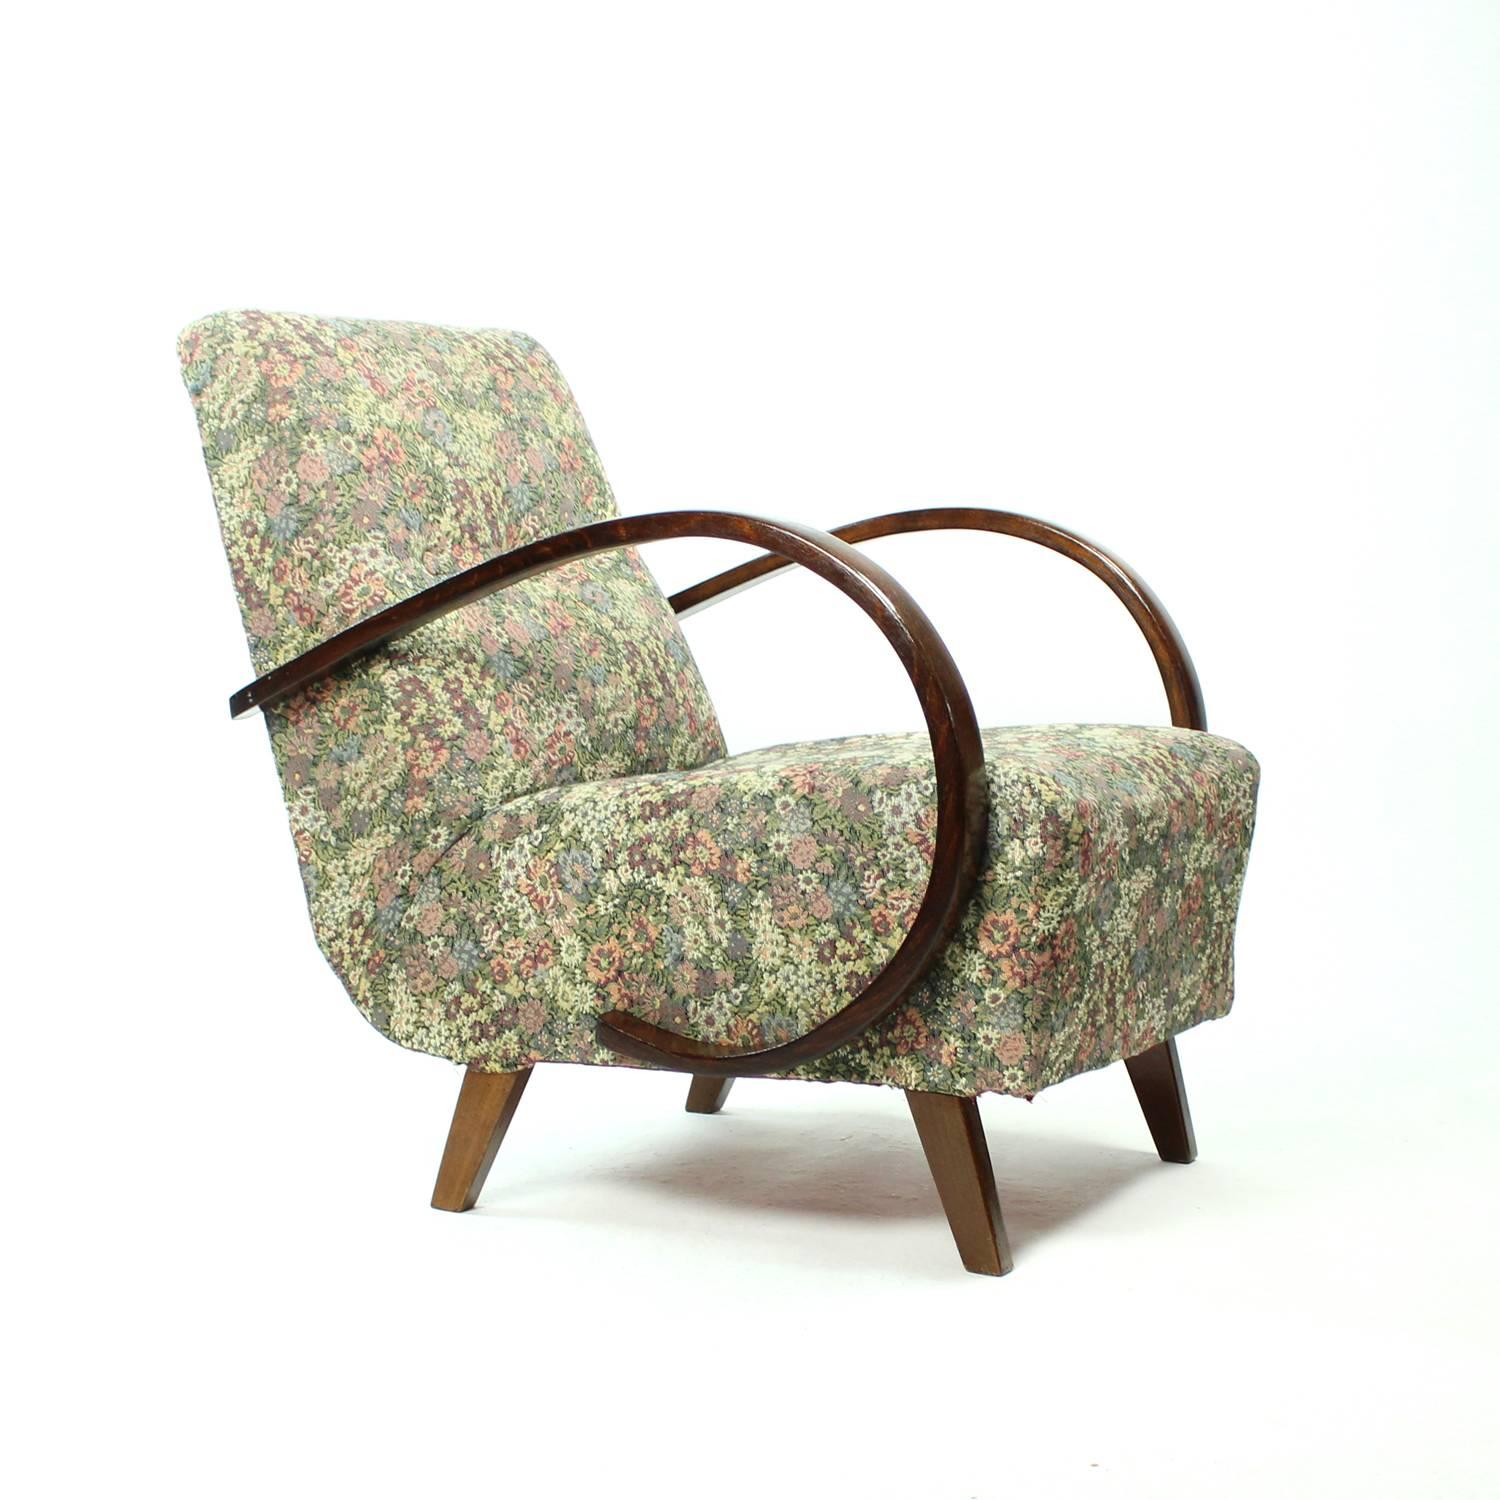 Classical Armchair by Jindrich Halabala in Original Floral Fabric, Czechia 1950s For Sale 1